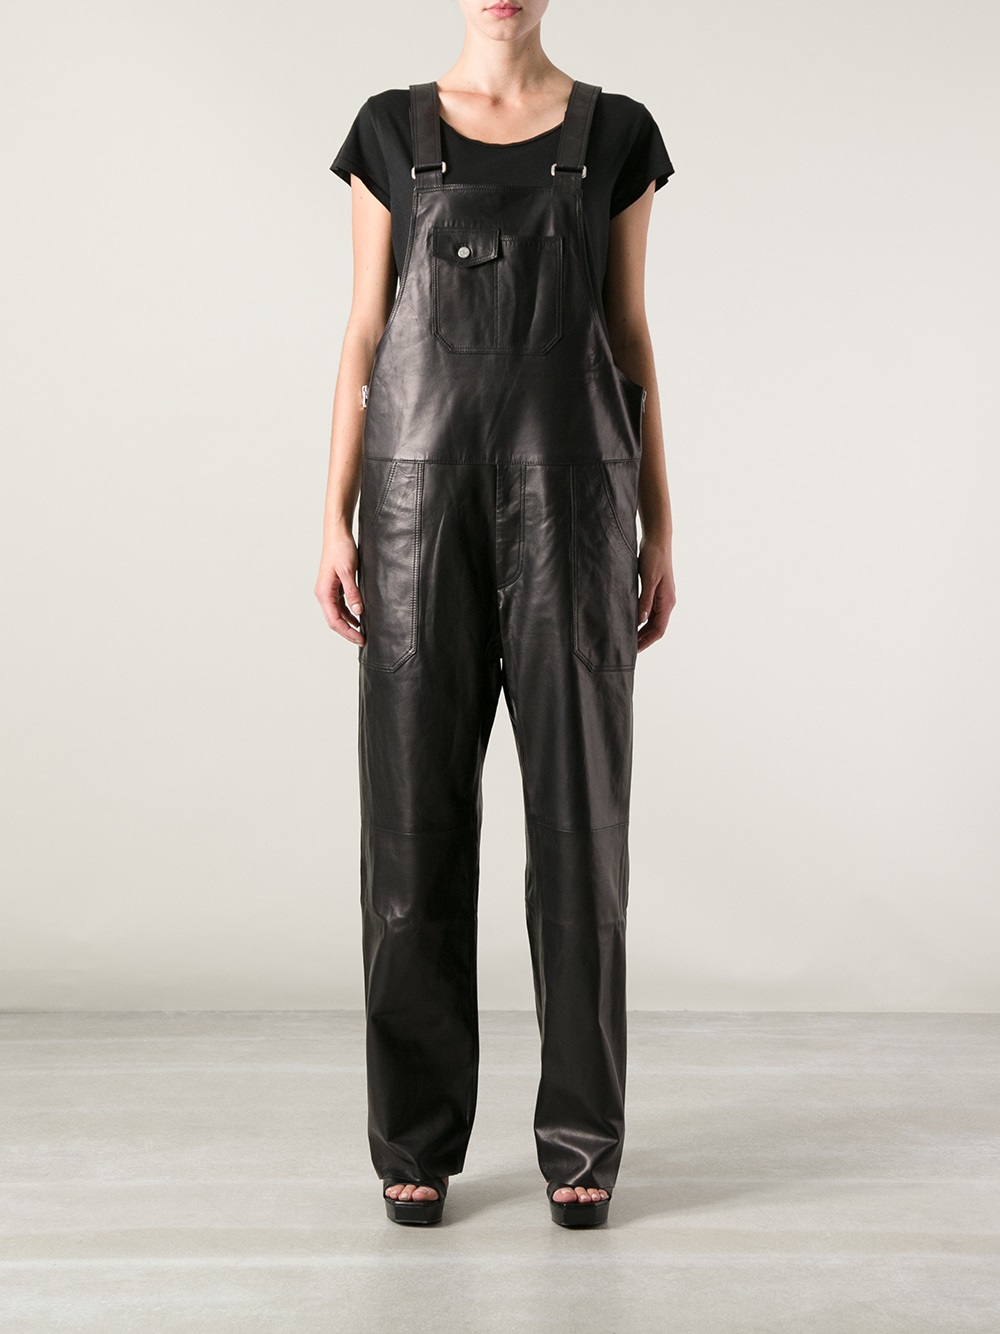 Acne Studios Chagall Leather Dungarees in Black - Lyst